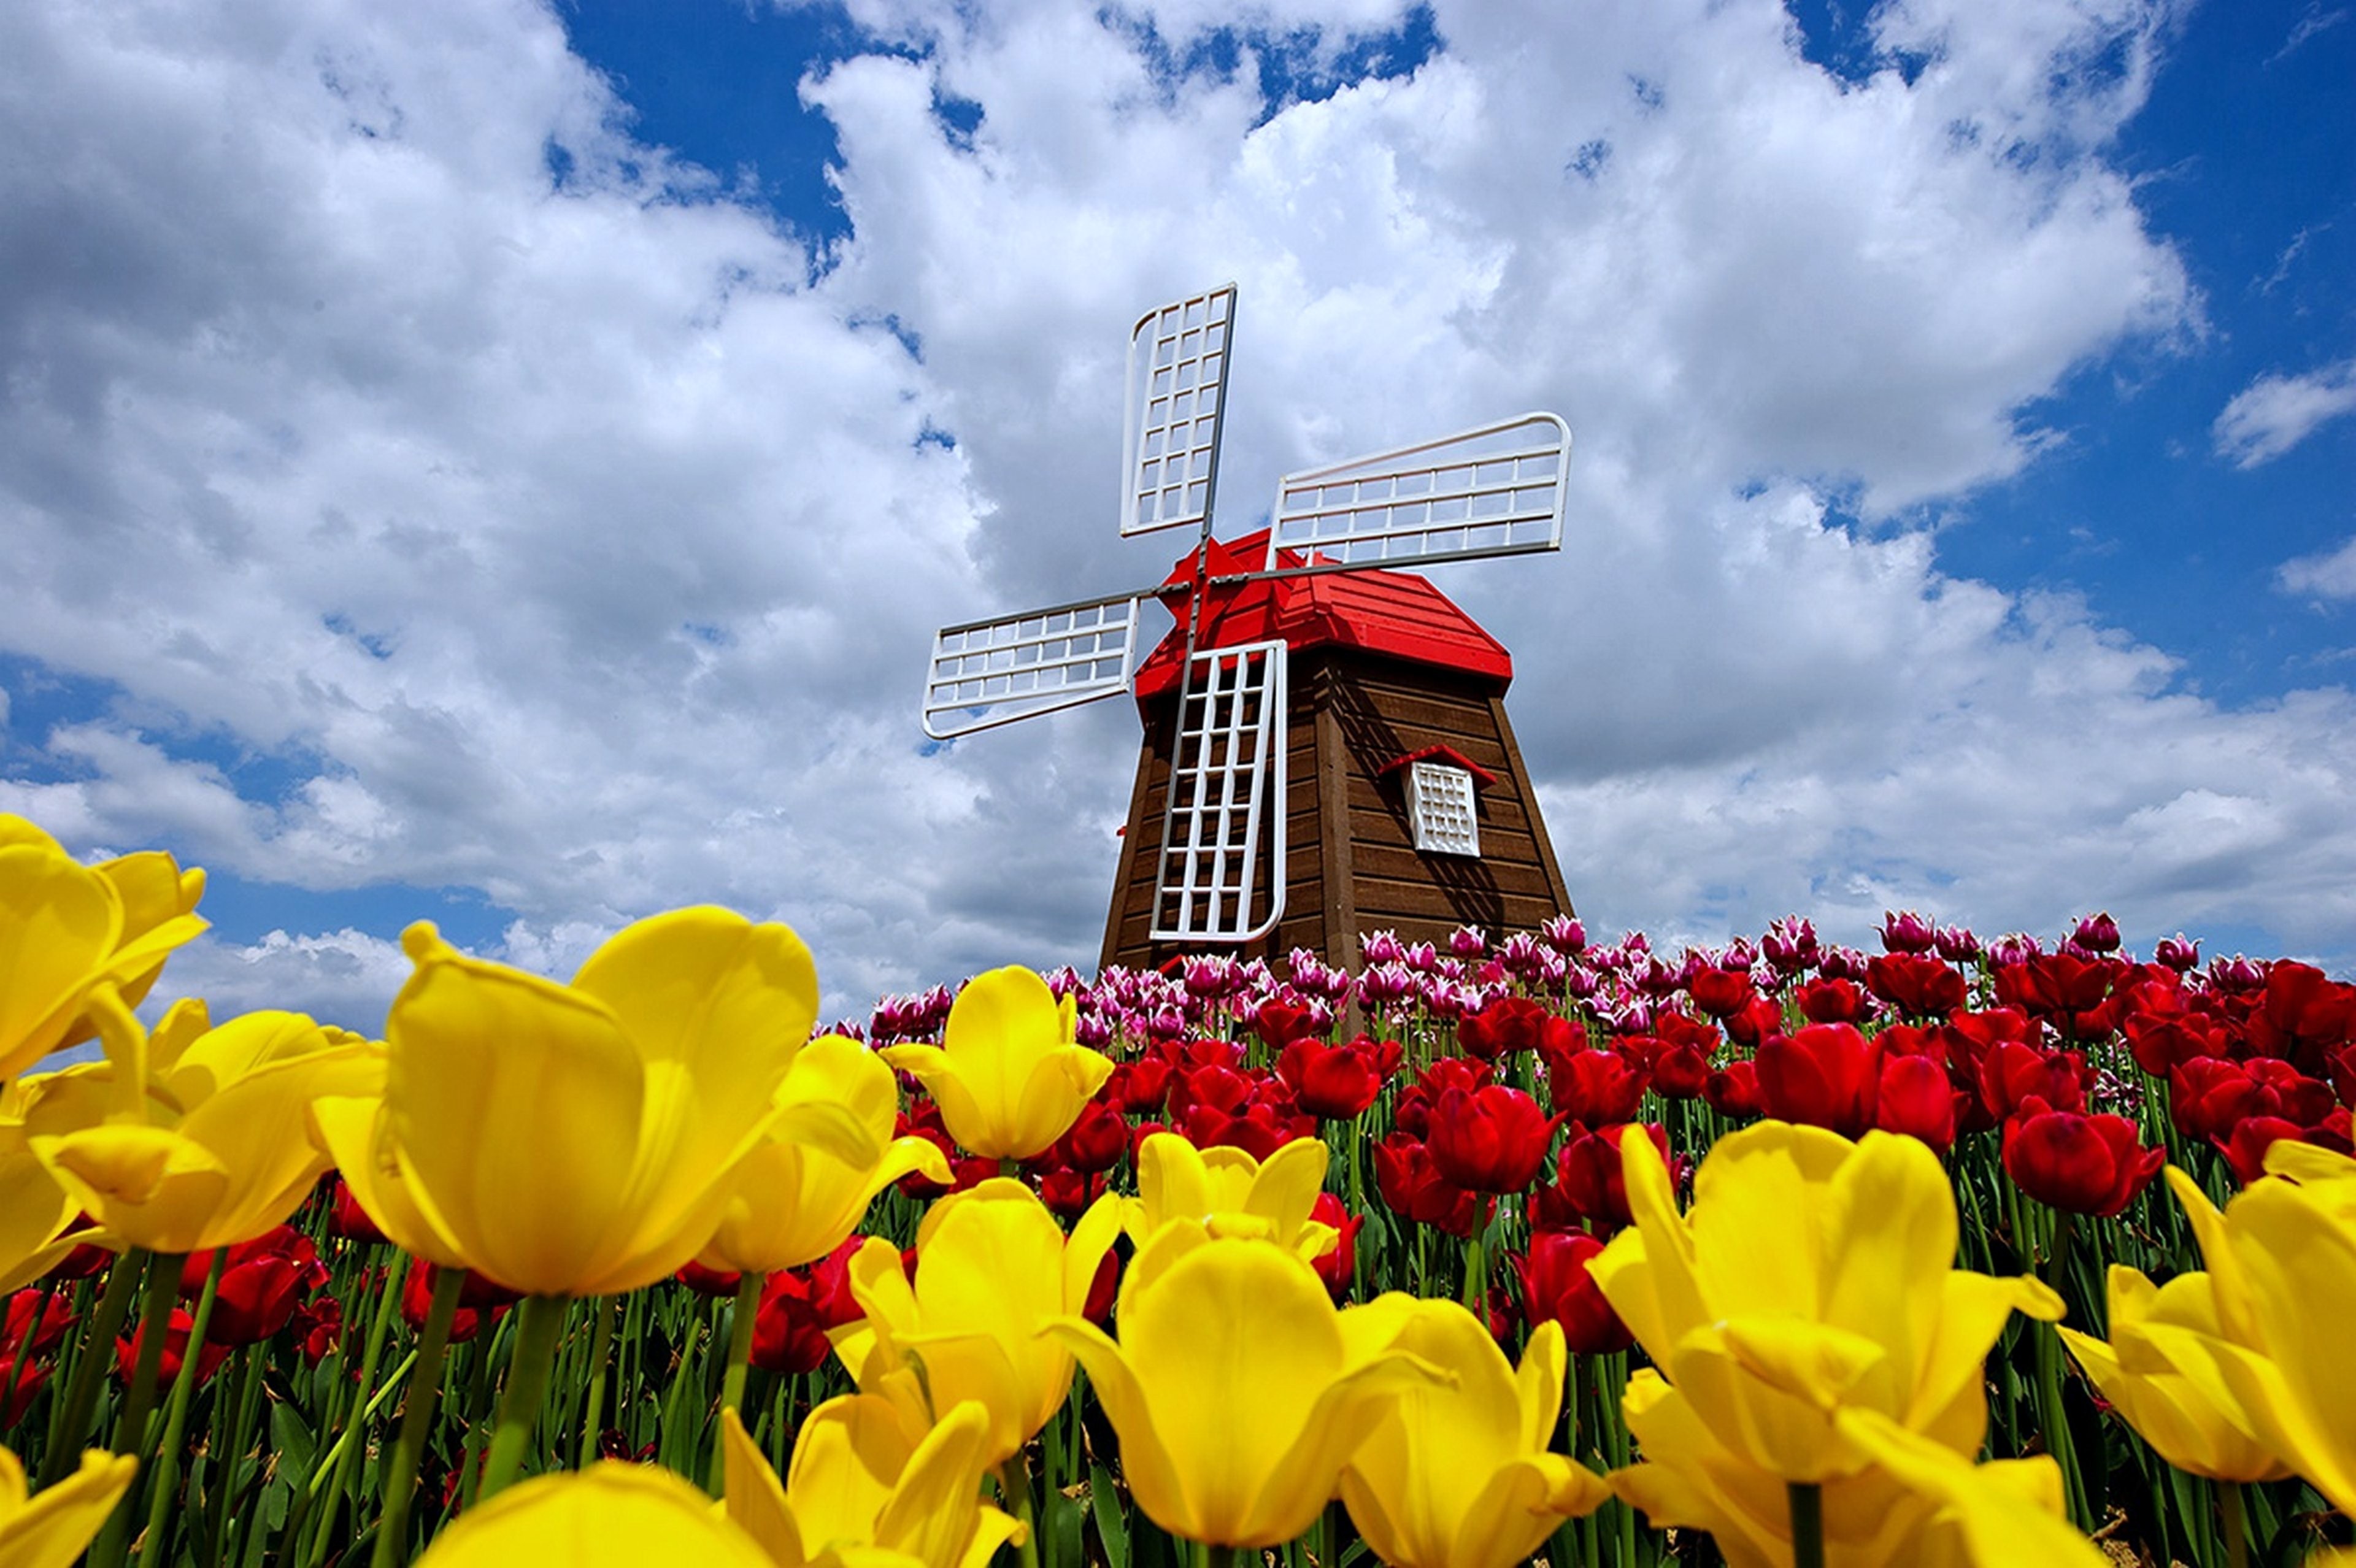 Nature Windmill Sky Clouds Spring Flowers Tulips